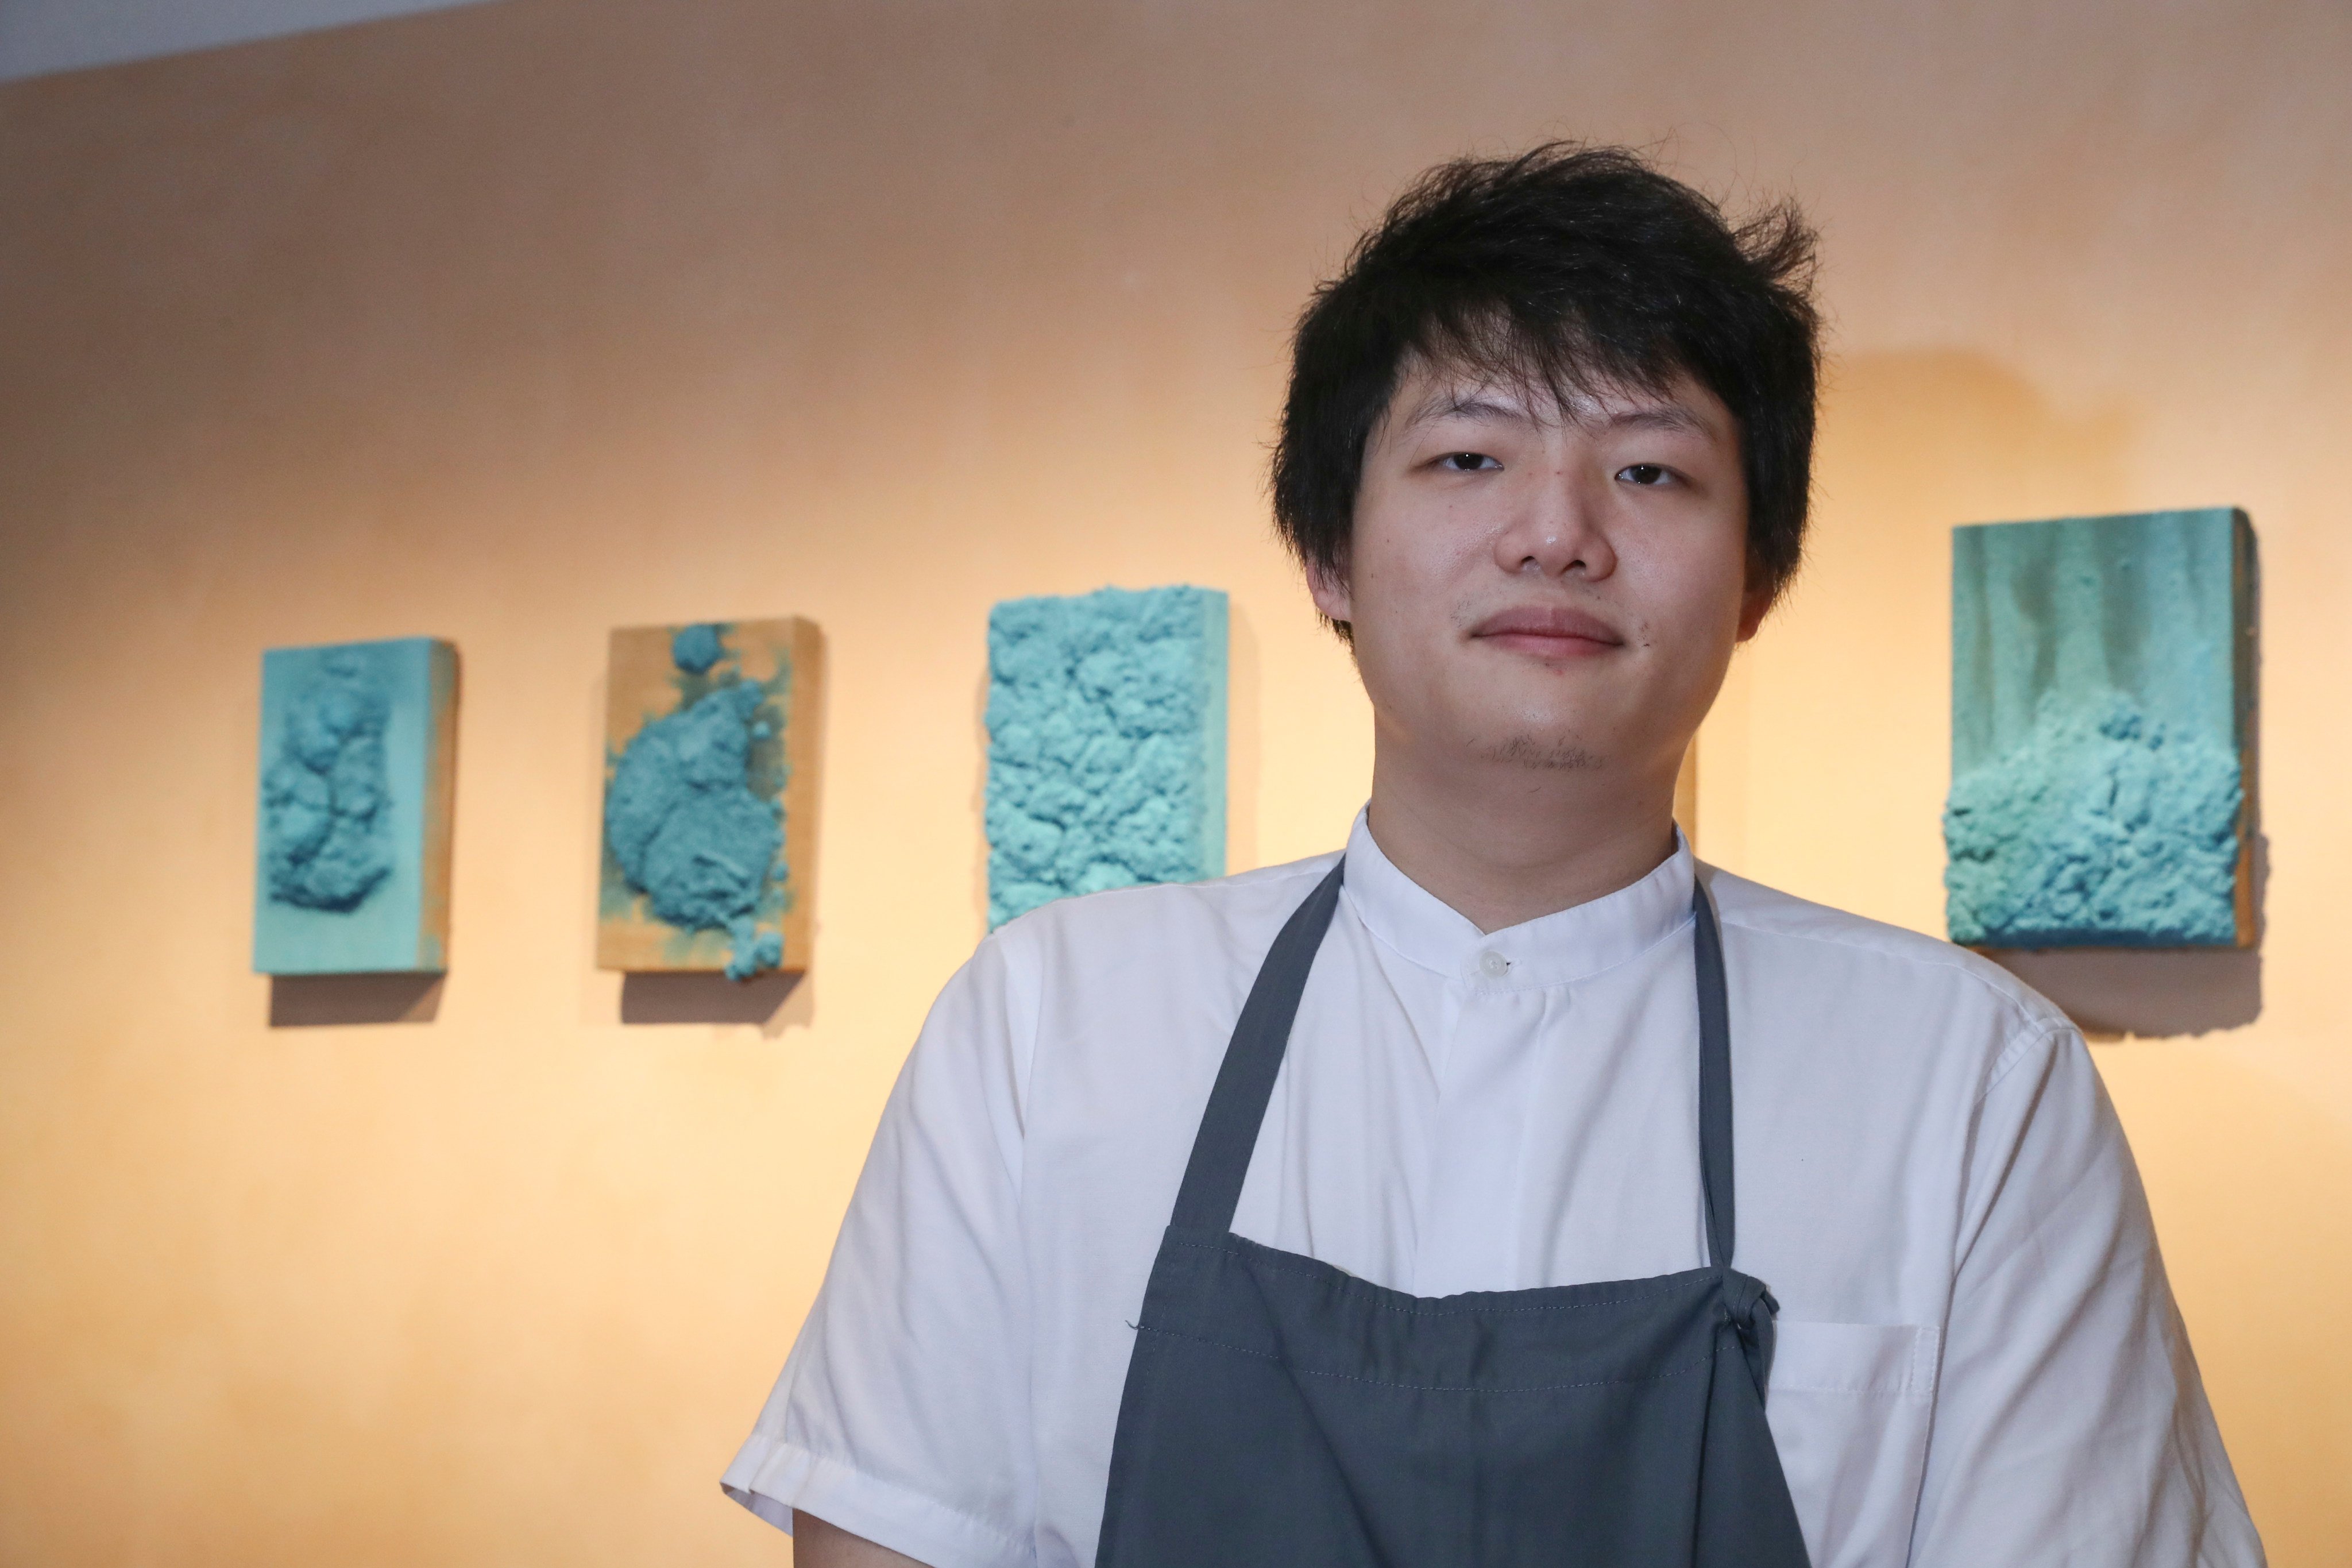 Barry Quek at one-Michelin-star Whey, in Hong Kong’s Central neighbourhood. The chef says American cooking competition show Top Chef had “a really big impact” on his career. Photo: Edmond So